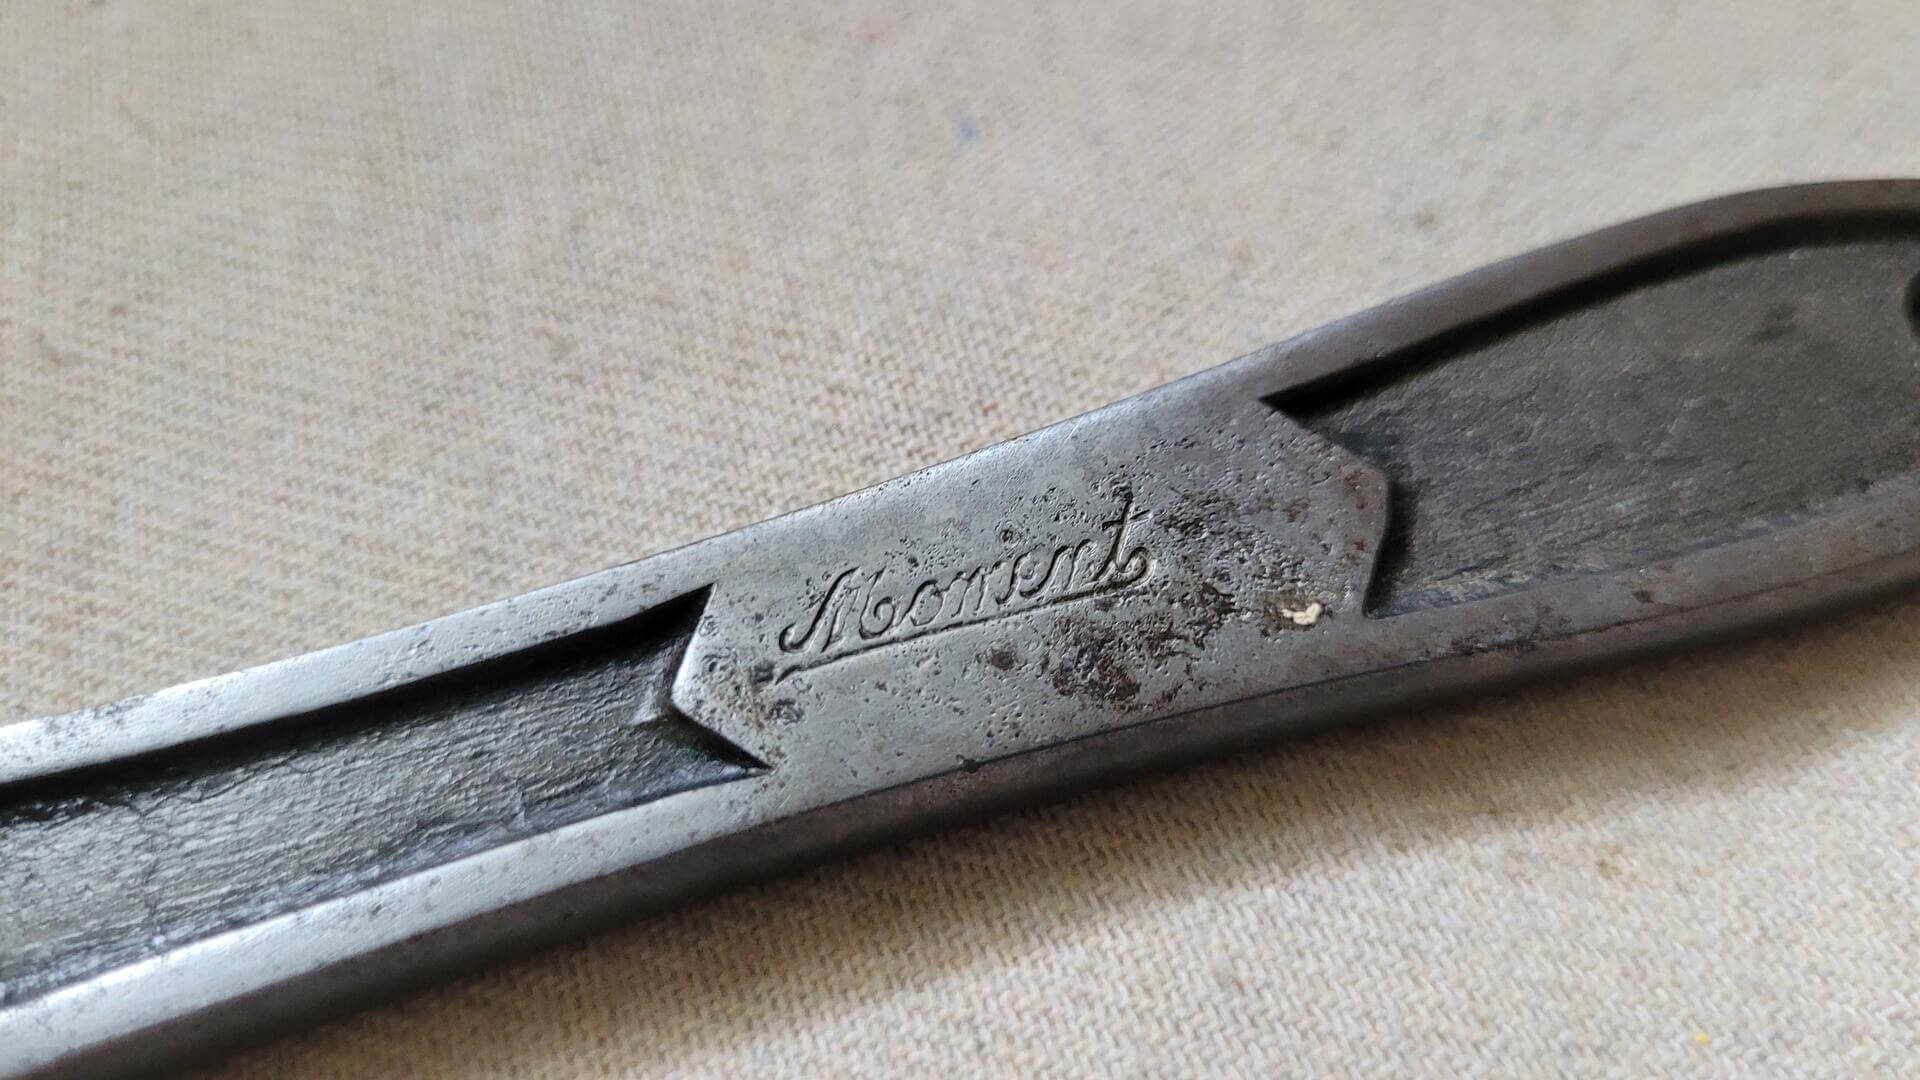 swivel-head-adjustable-wrench-antique-marked-moment-rare-vintage–antique-collectible-hand-tools